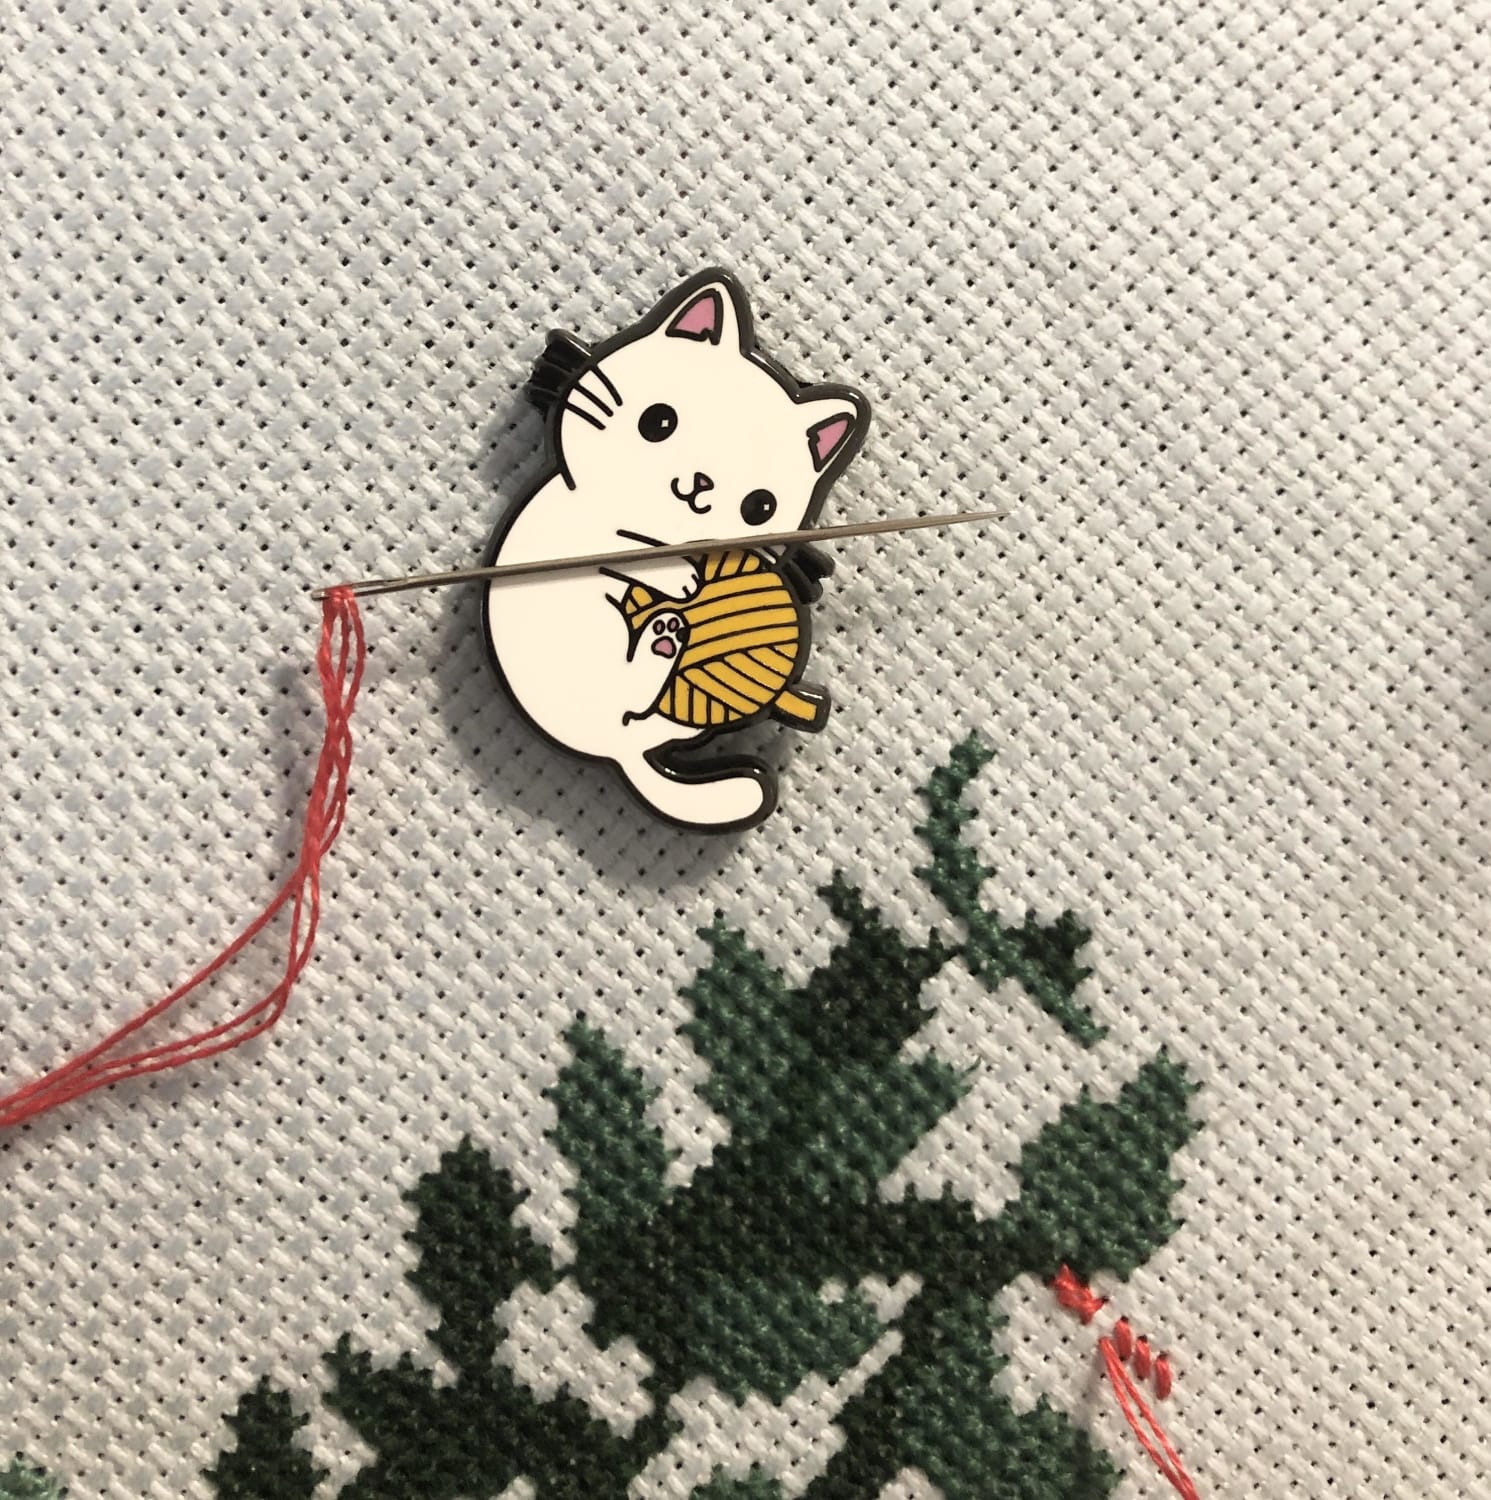 [PIC] I had to put my cat down recently and I got a needle minder that looks like him so he can still “help” when I stitch